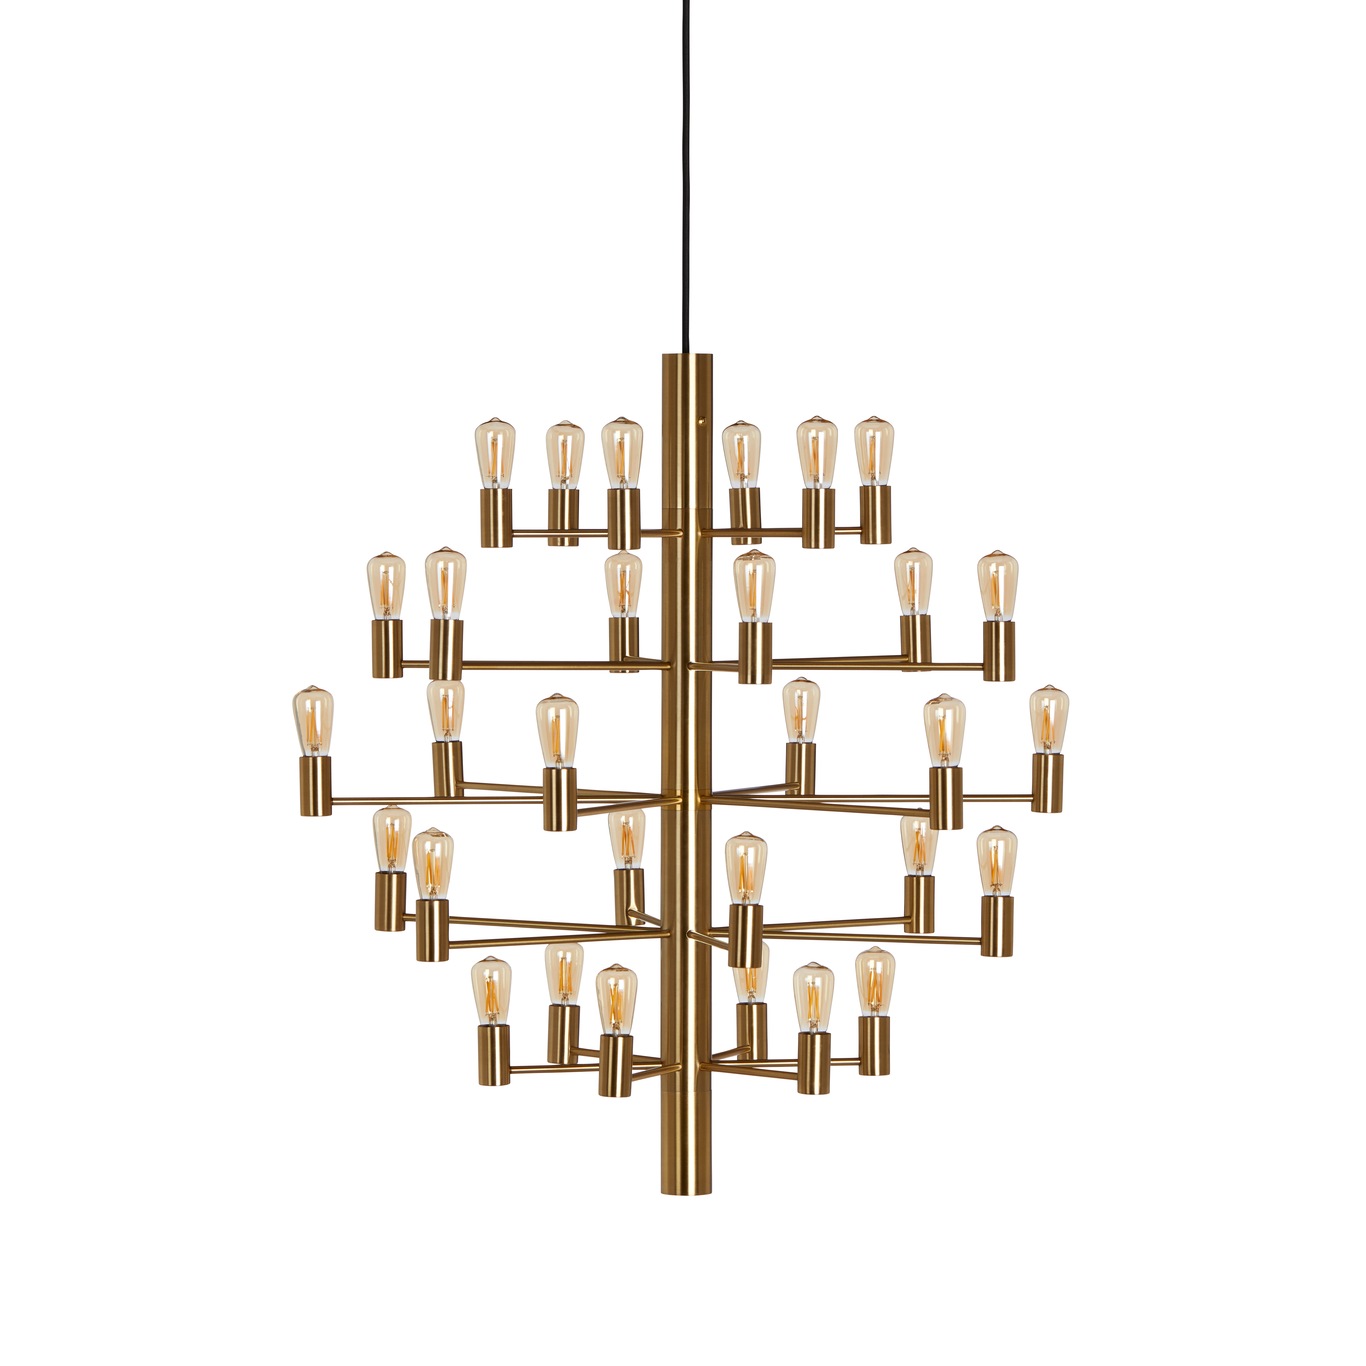 Manola 30 Chandelier Dimmable LED, Satin Brass